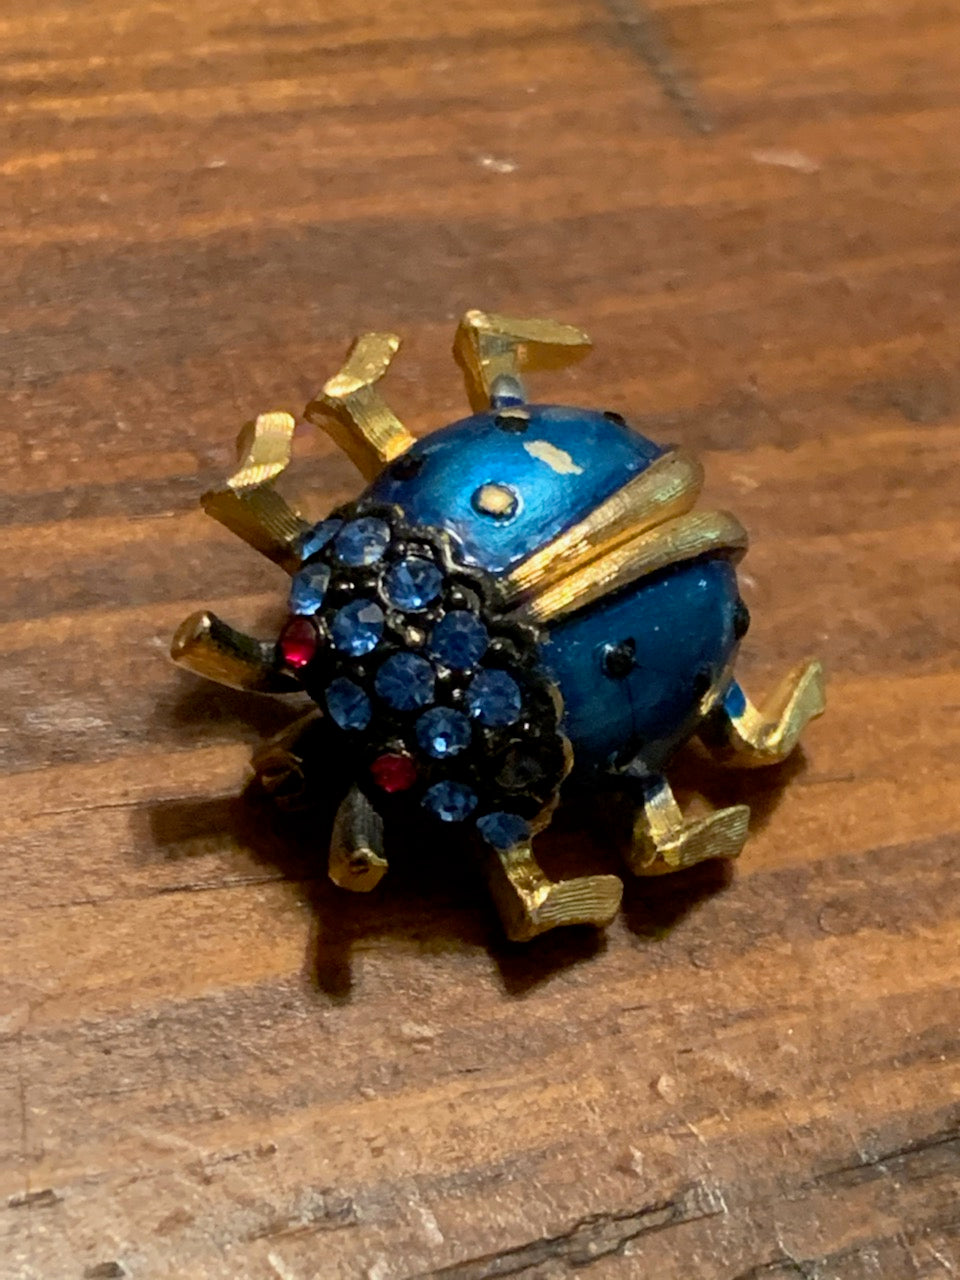 Order of the Blue Scarab